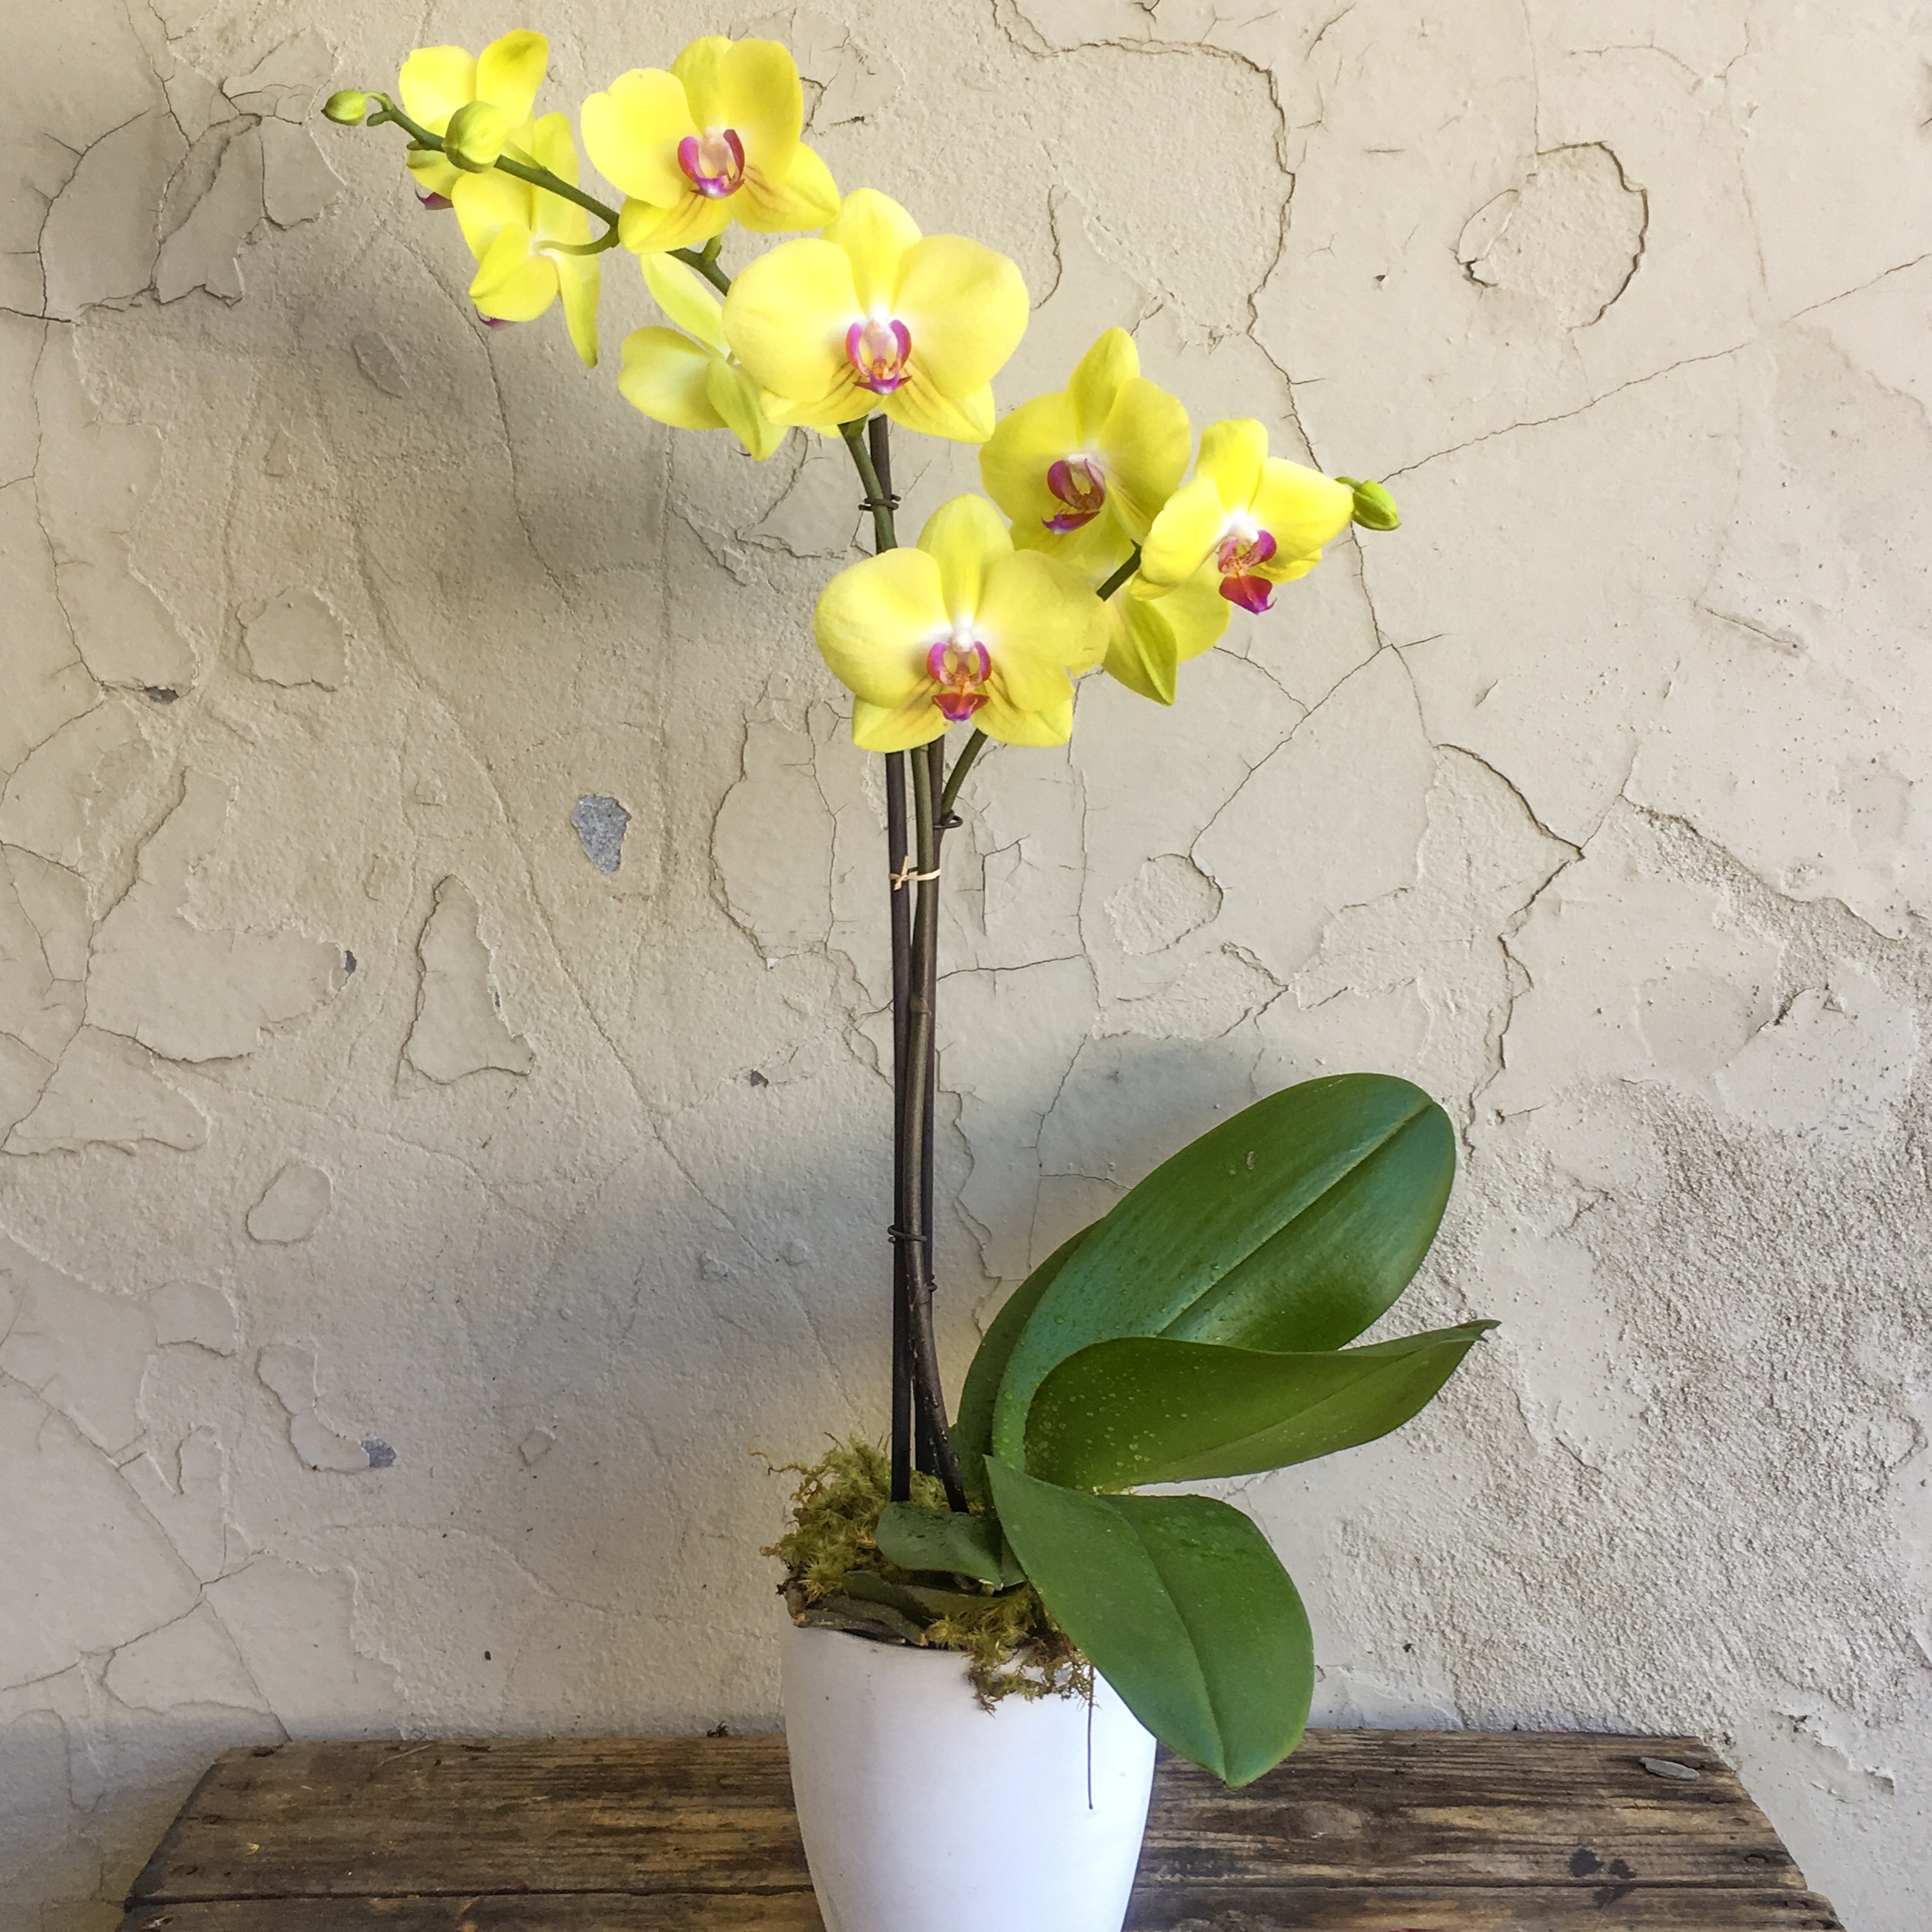 A pot of yellow phalaenopsis orchid with 1 branch expresses love